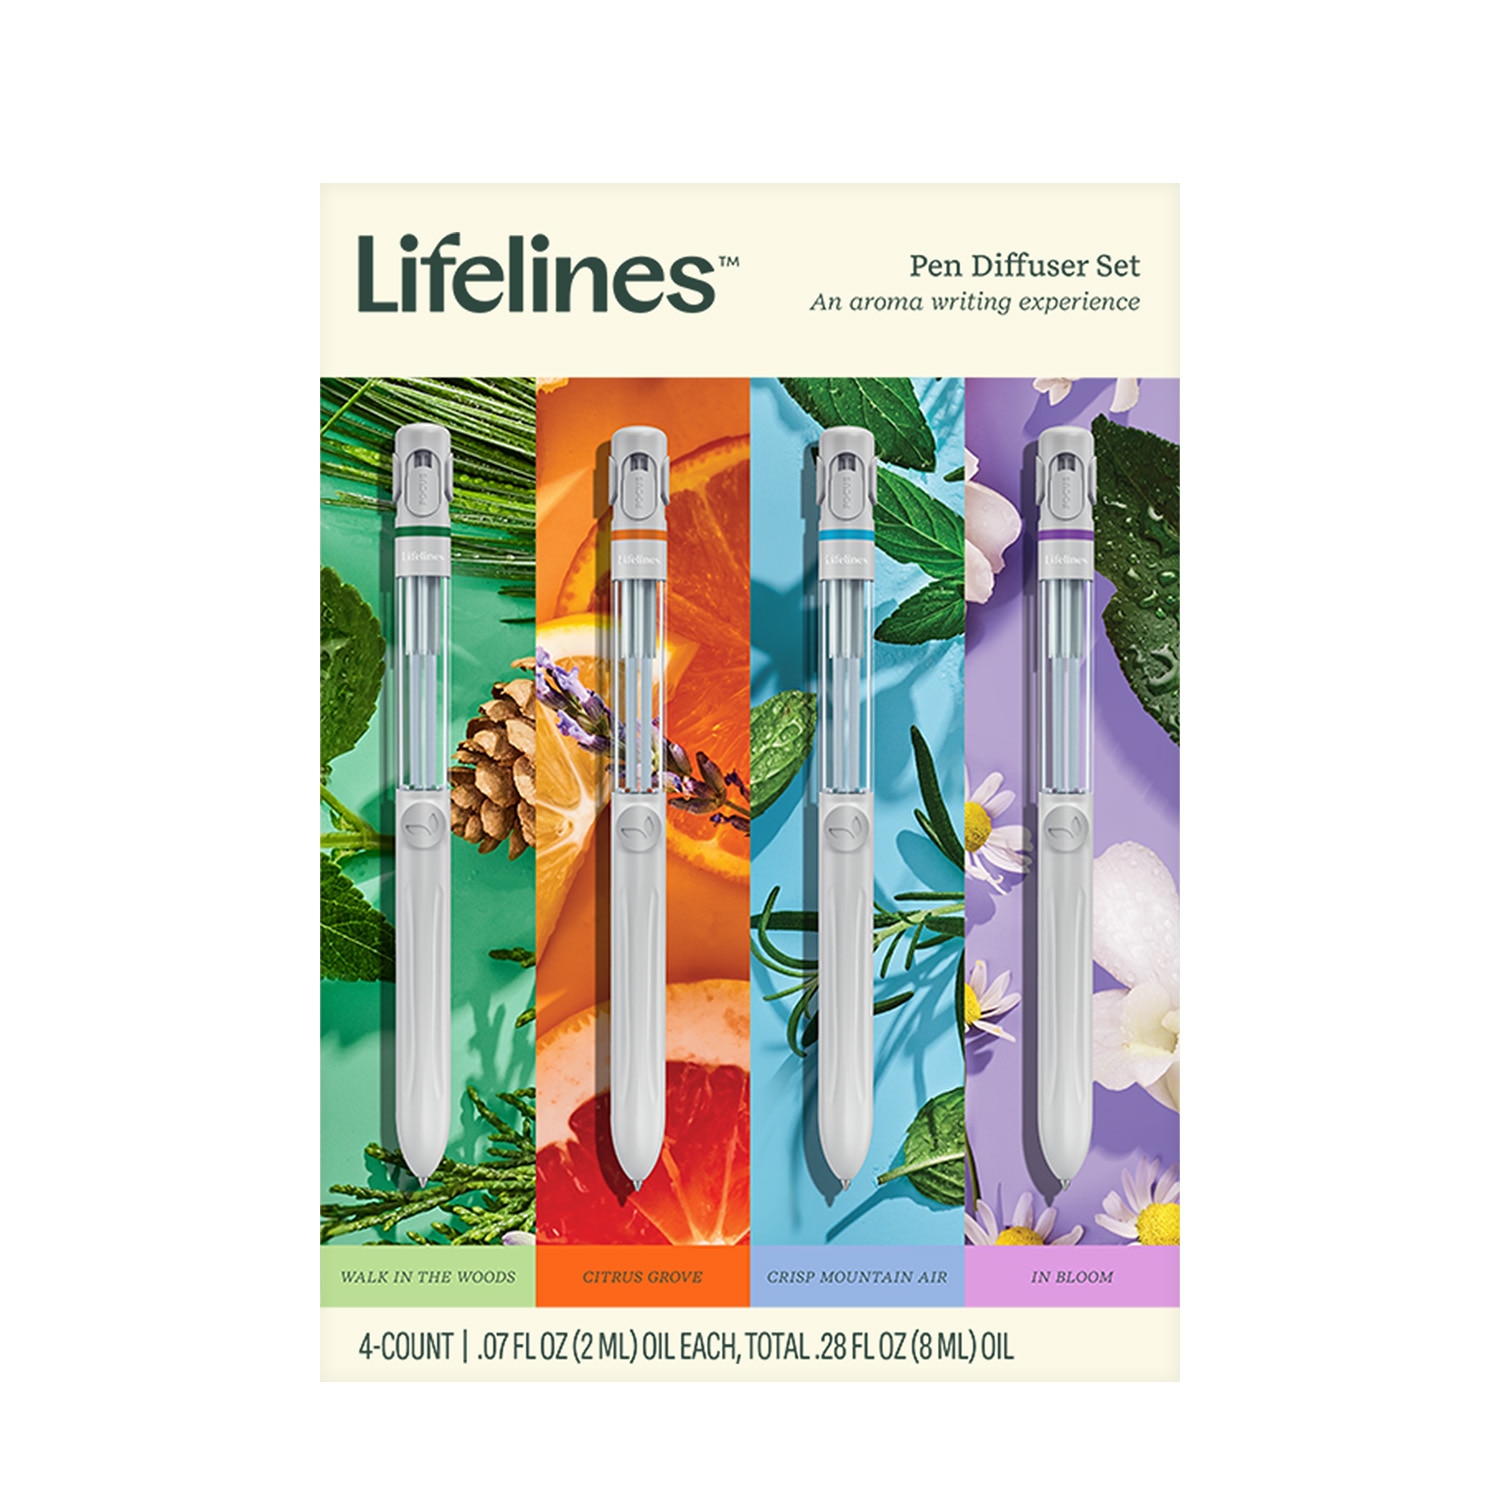 Lifelines Pen Diffuser Set - 4 Pack with Assorted Essential Oil Blendss - Crisp Mountain Air, In Bloom, Walk In The Woods, Citrus Grove